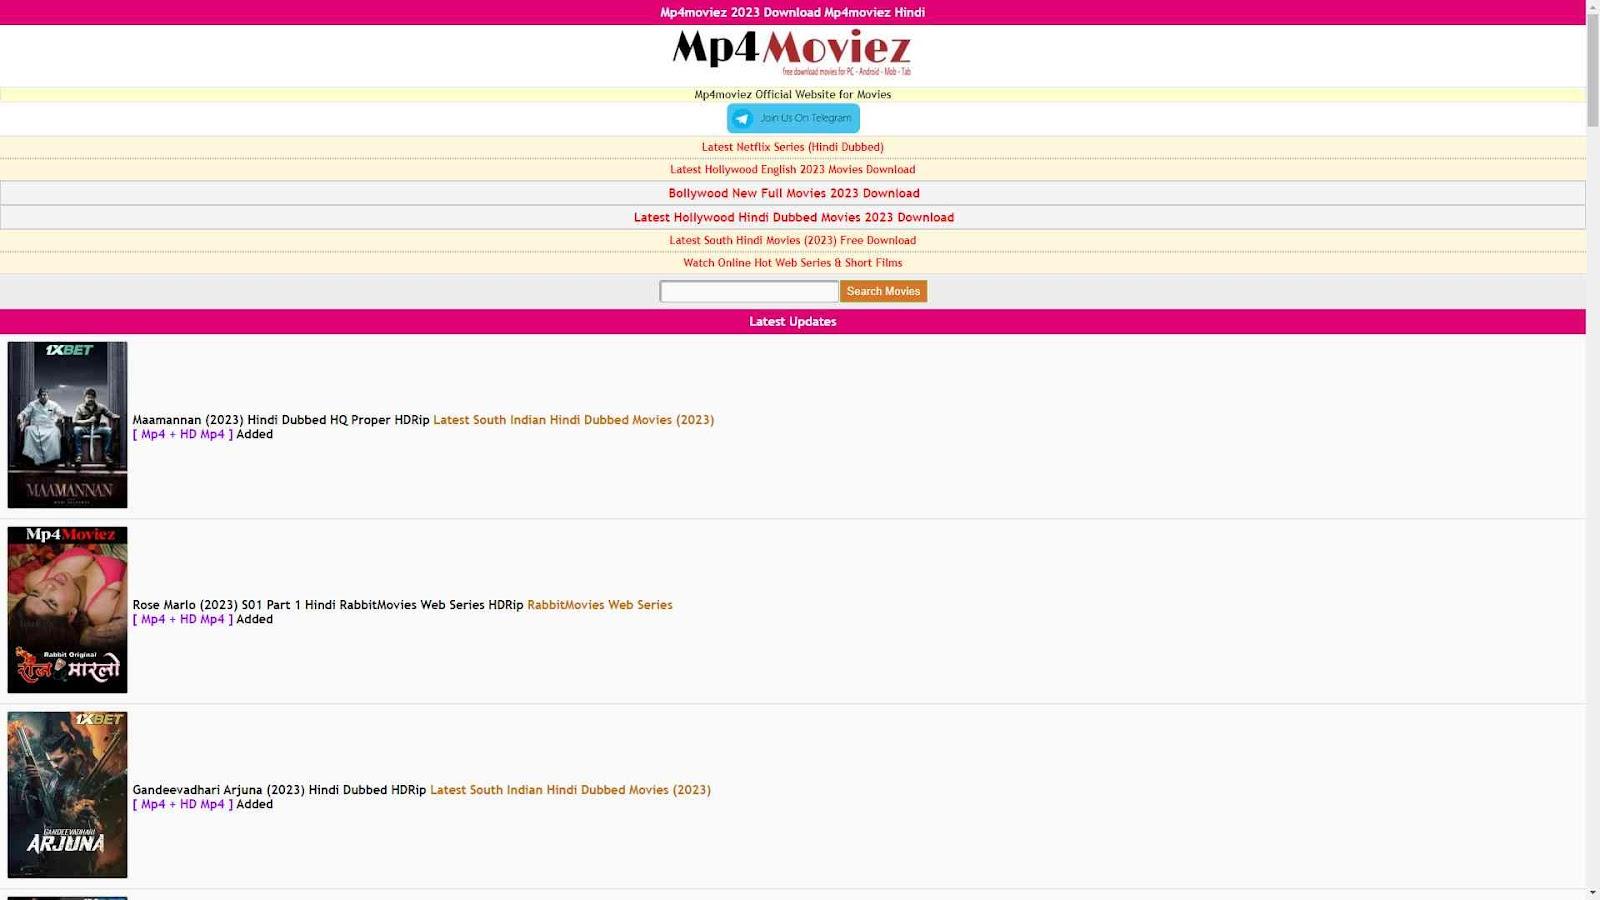 What is Mp4Moviez